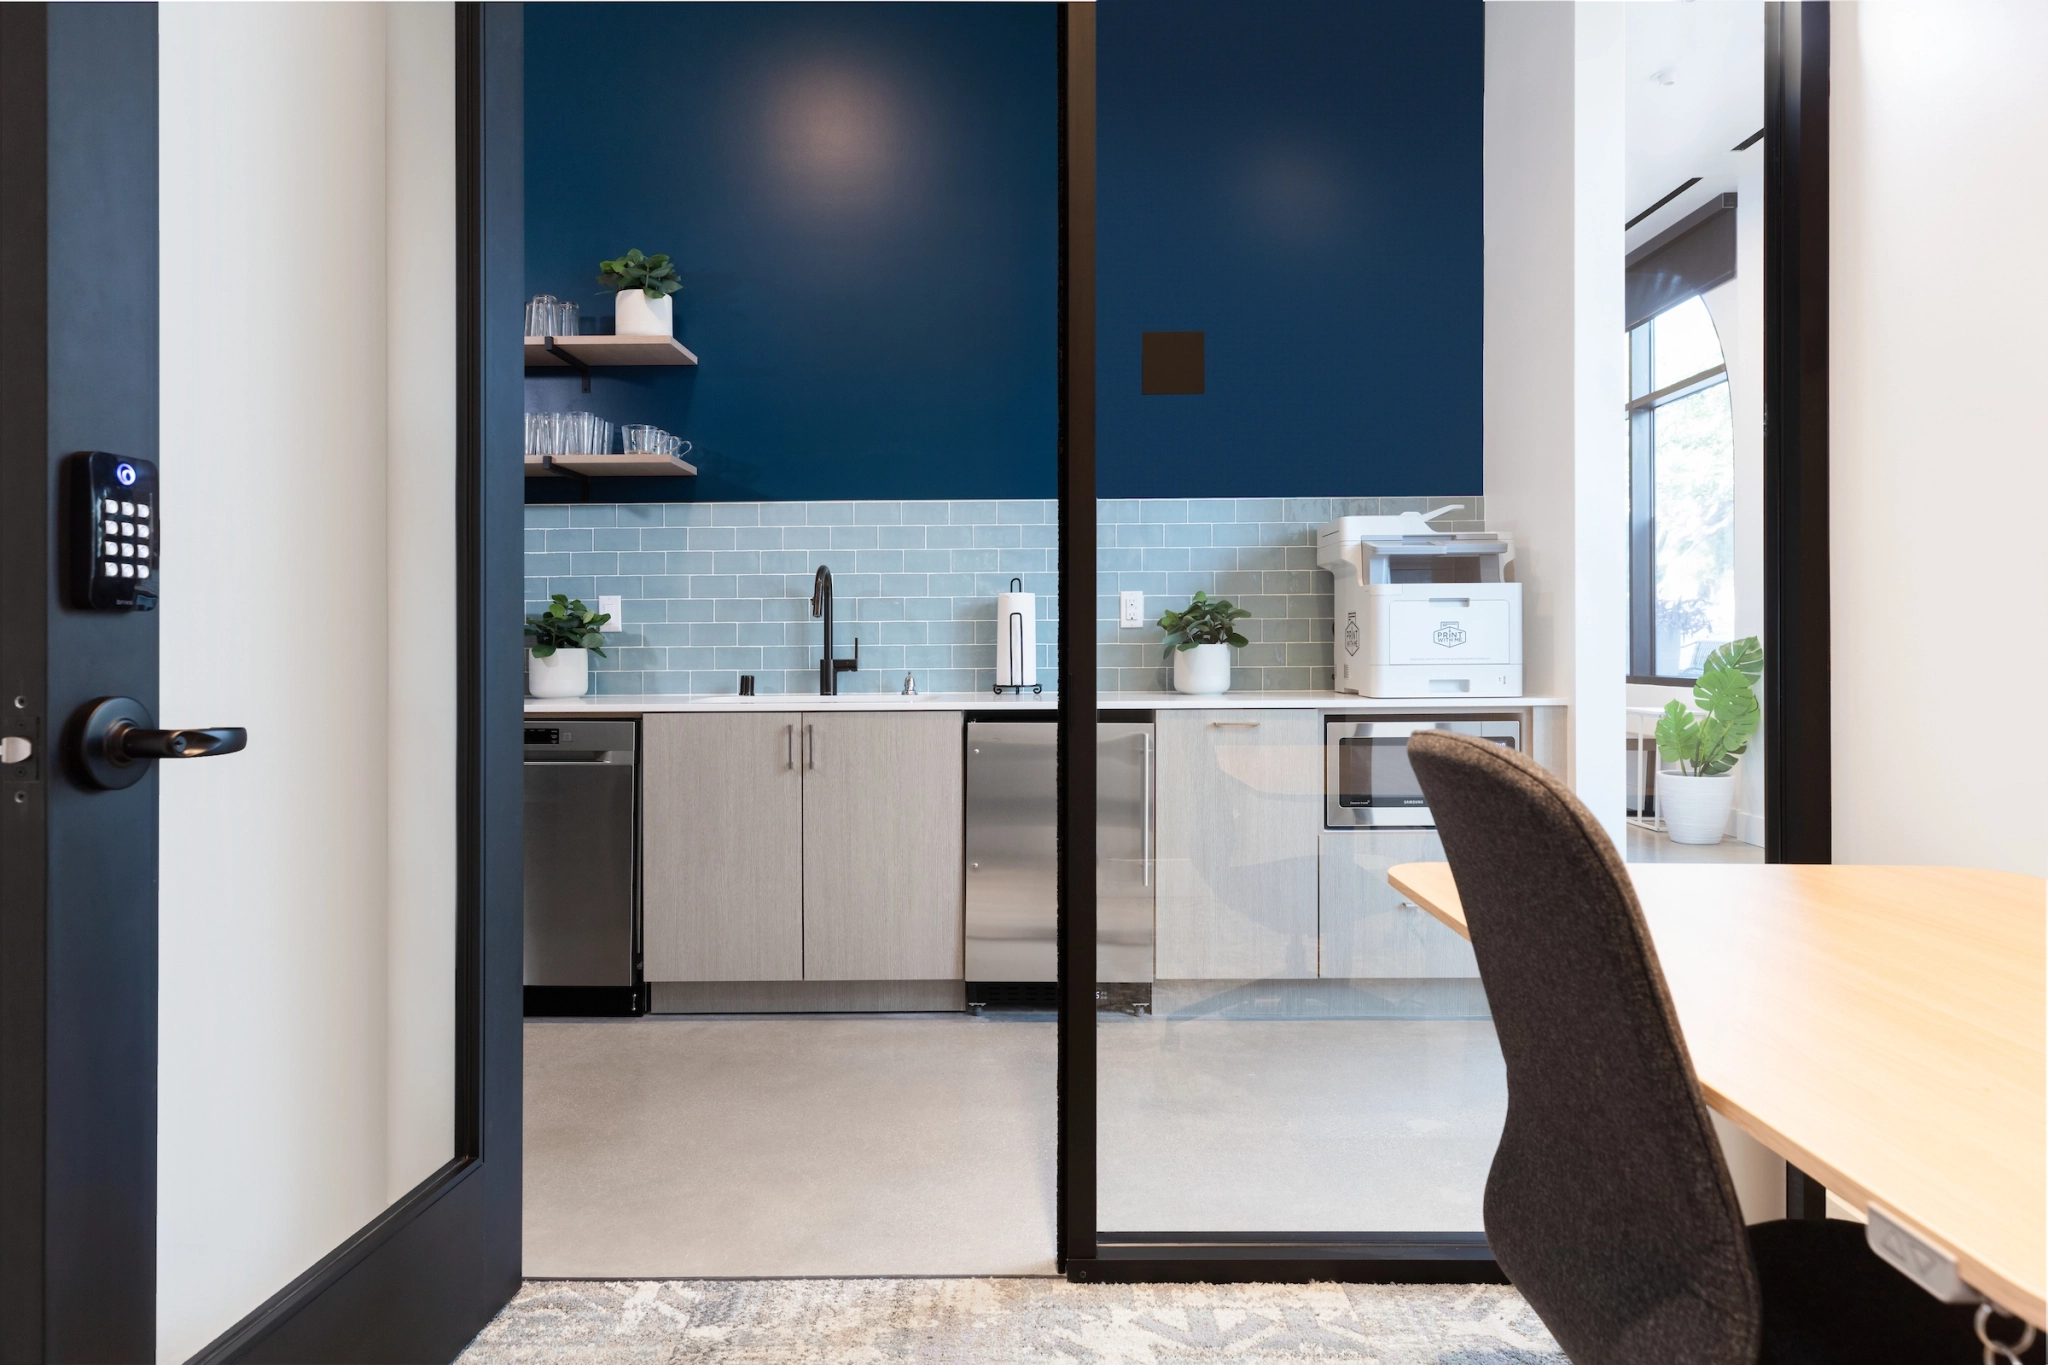 An office meeting room with a glass door and blue walls.